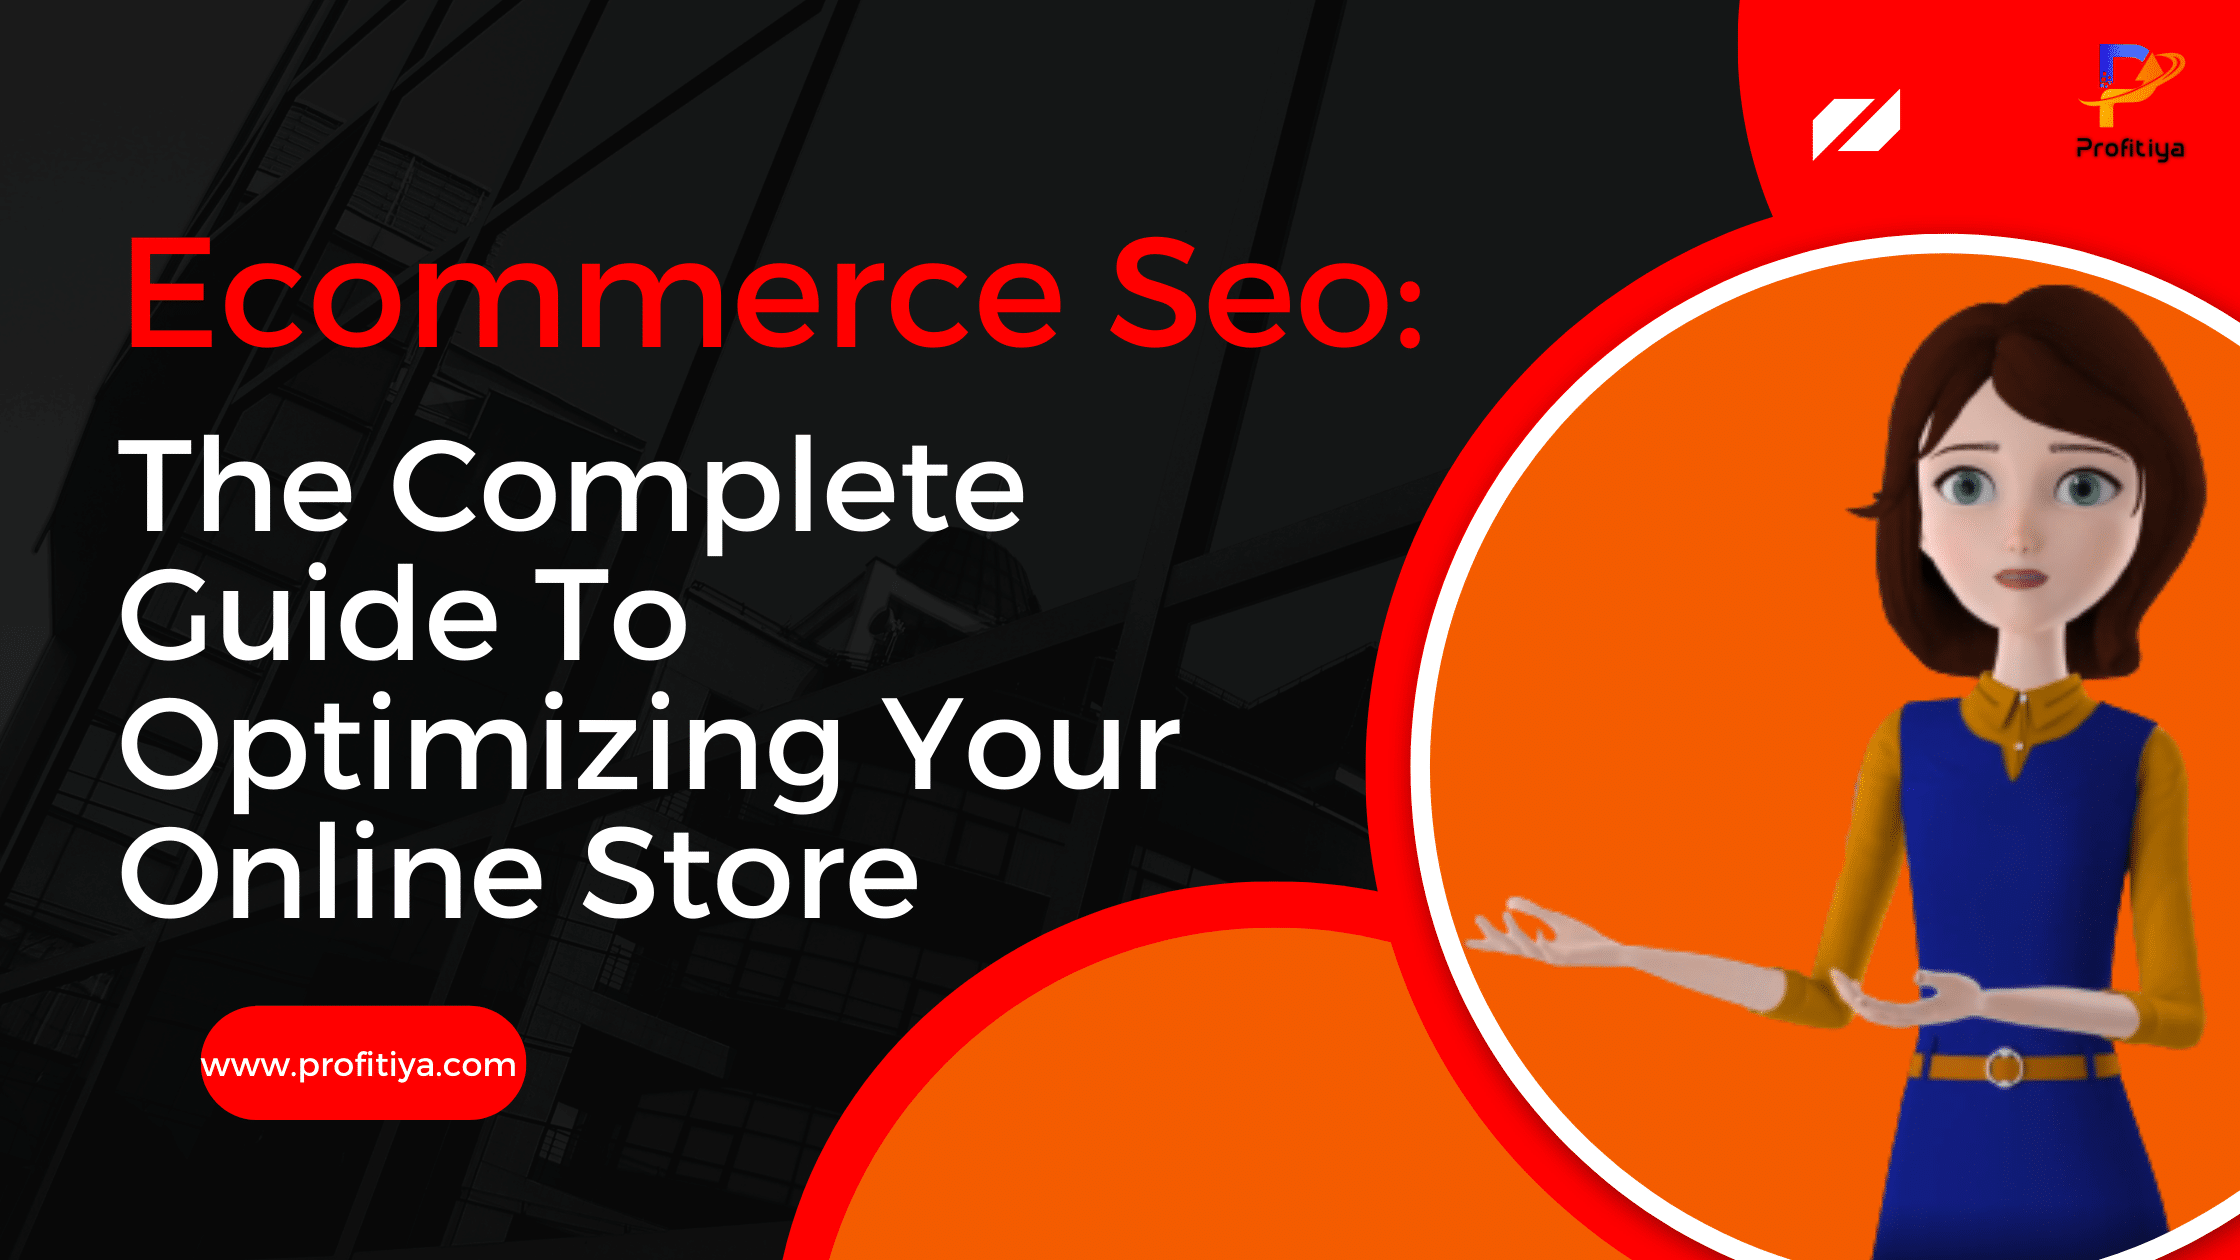 Ecommerce Seo The Complete Guide To Optimizing Your Online Store